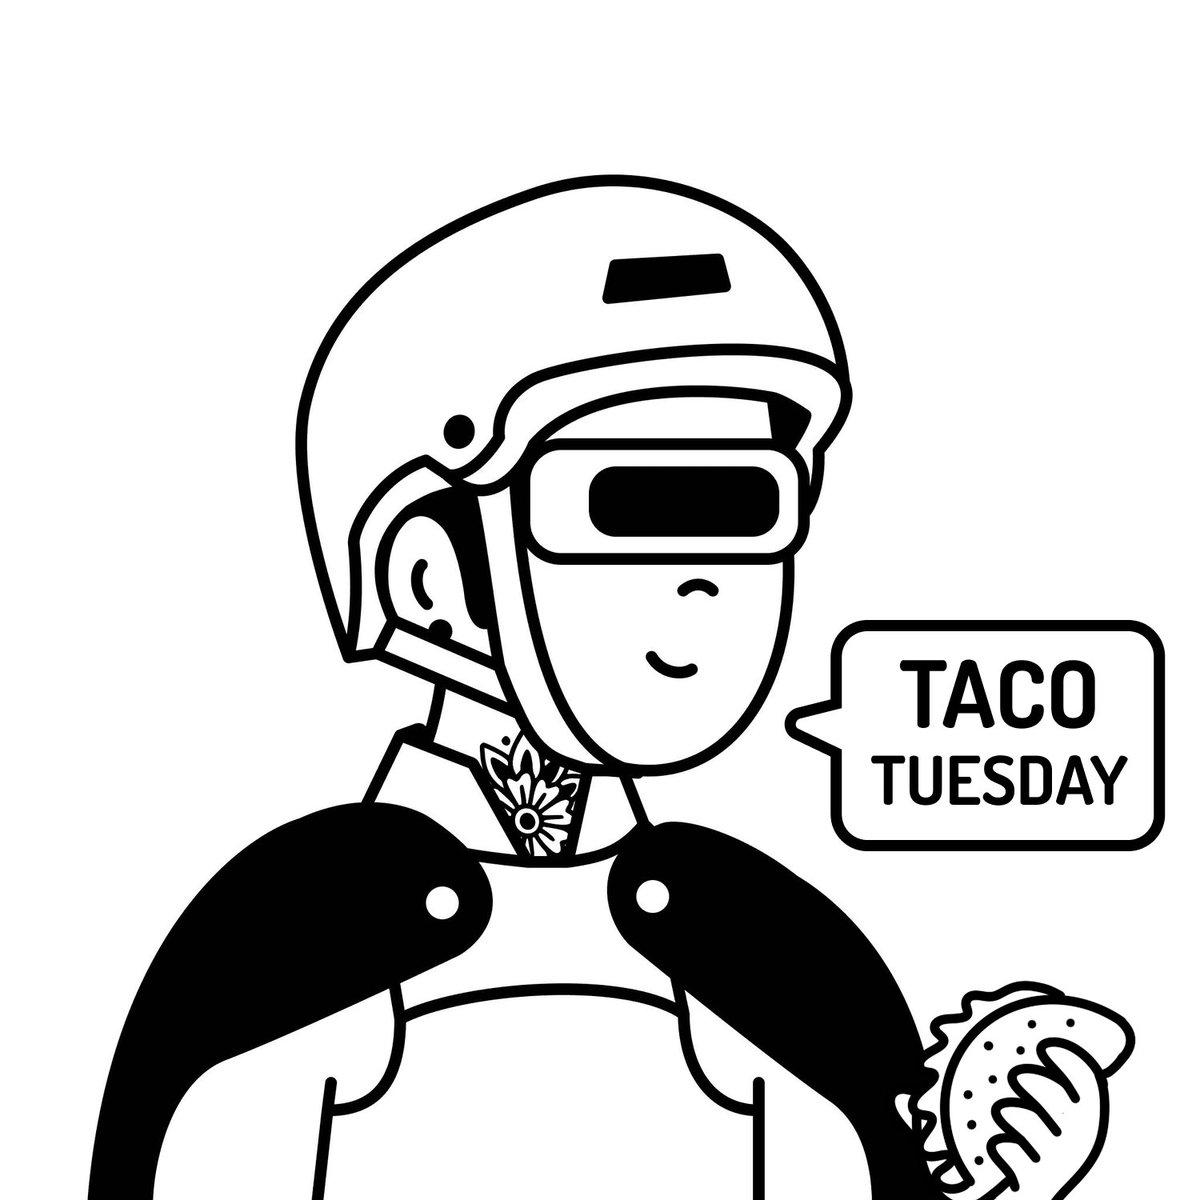 GM #NFTcommunity Happy Taco Tuesday 🌮😍 Owned by @HelloRyanHolmes #tacotuesday #polygonnfts